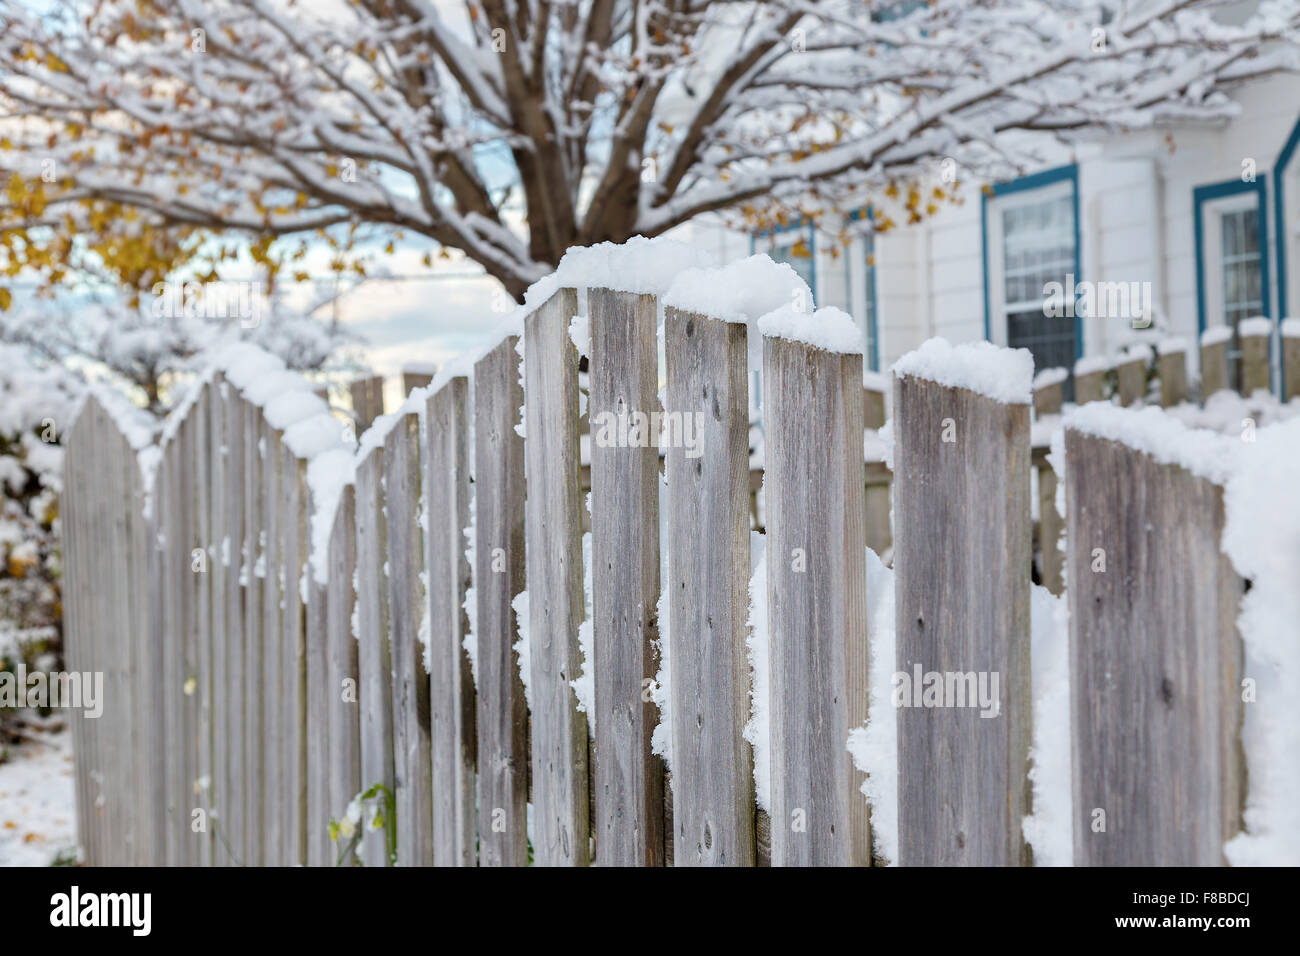 A wooden fence around a residential home's back yard. Stock Photo